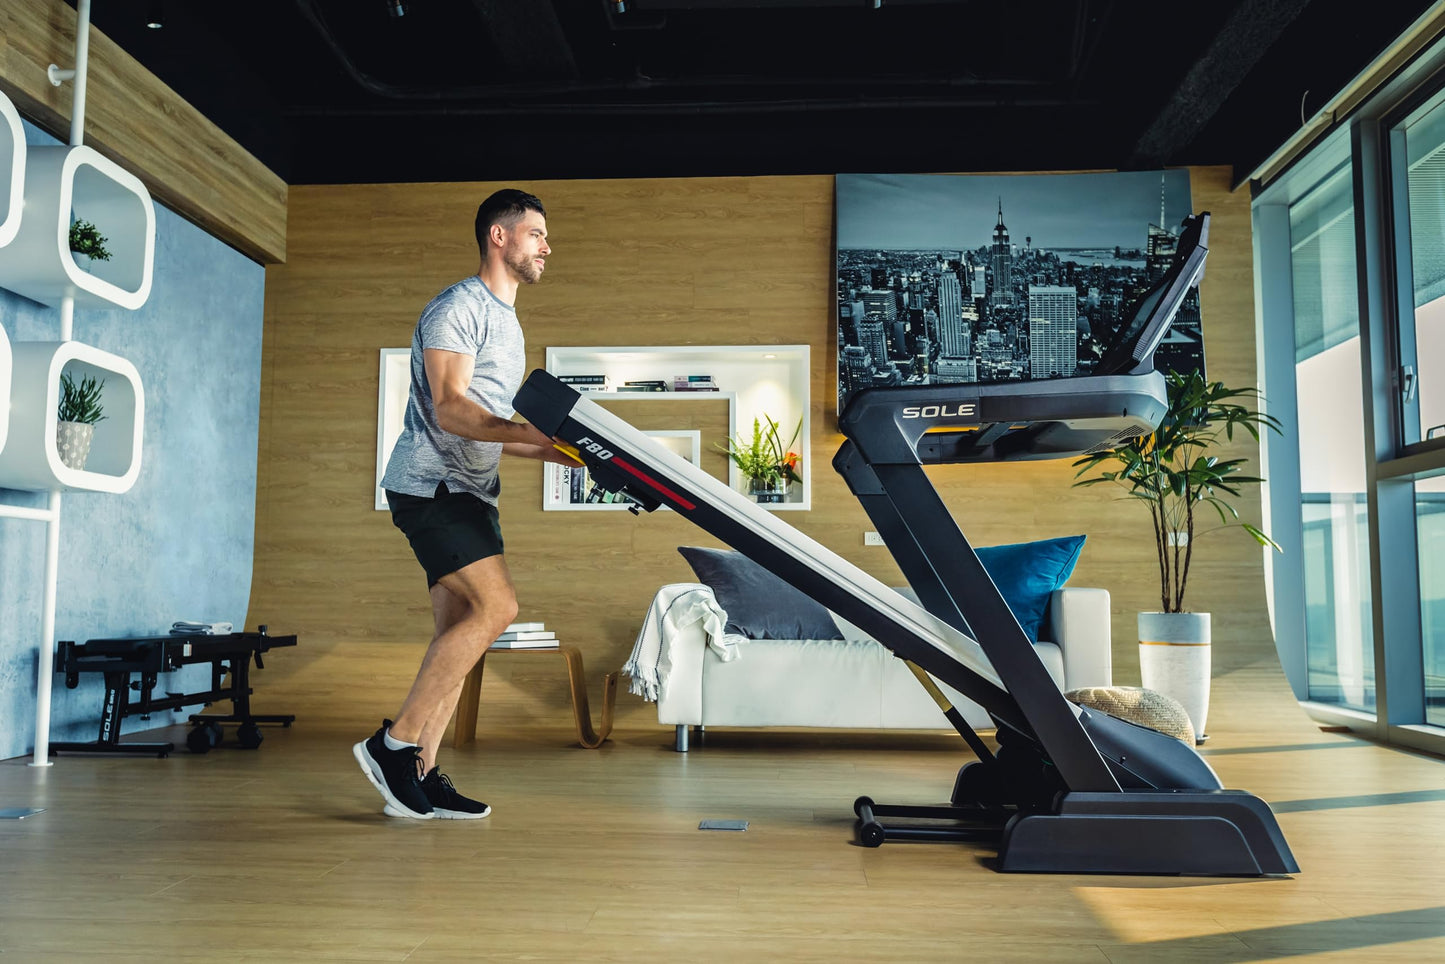 New 2023 Treadmill, Sole F80 Treadmill, Foldable Treadmills for Home Use, Bluetooth, Touch Screen, Treadmill Foldable, Treadmills for Home with Incline, Home Exercise Treadmill (Sole F80)